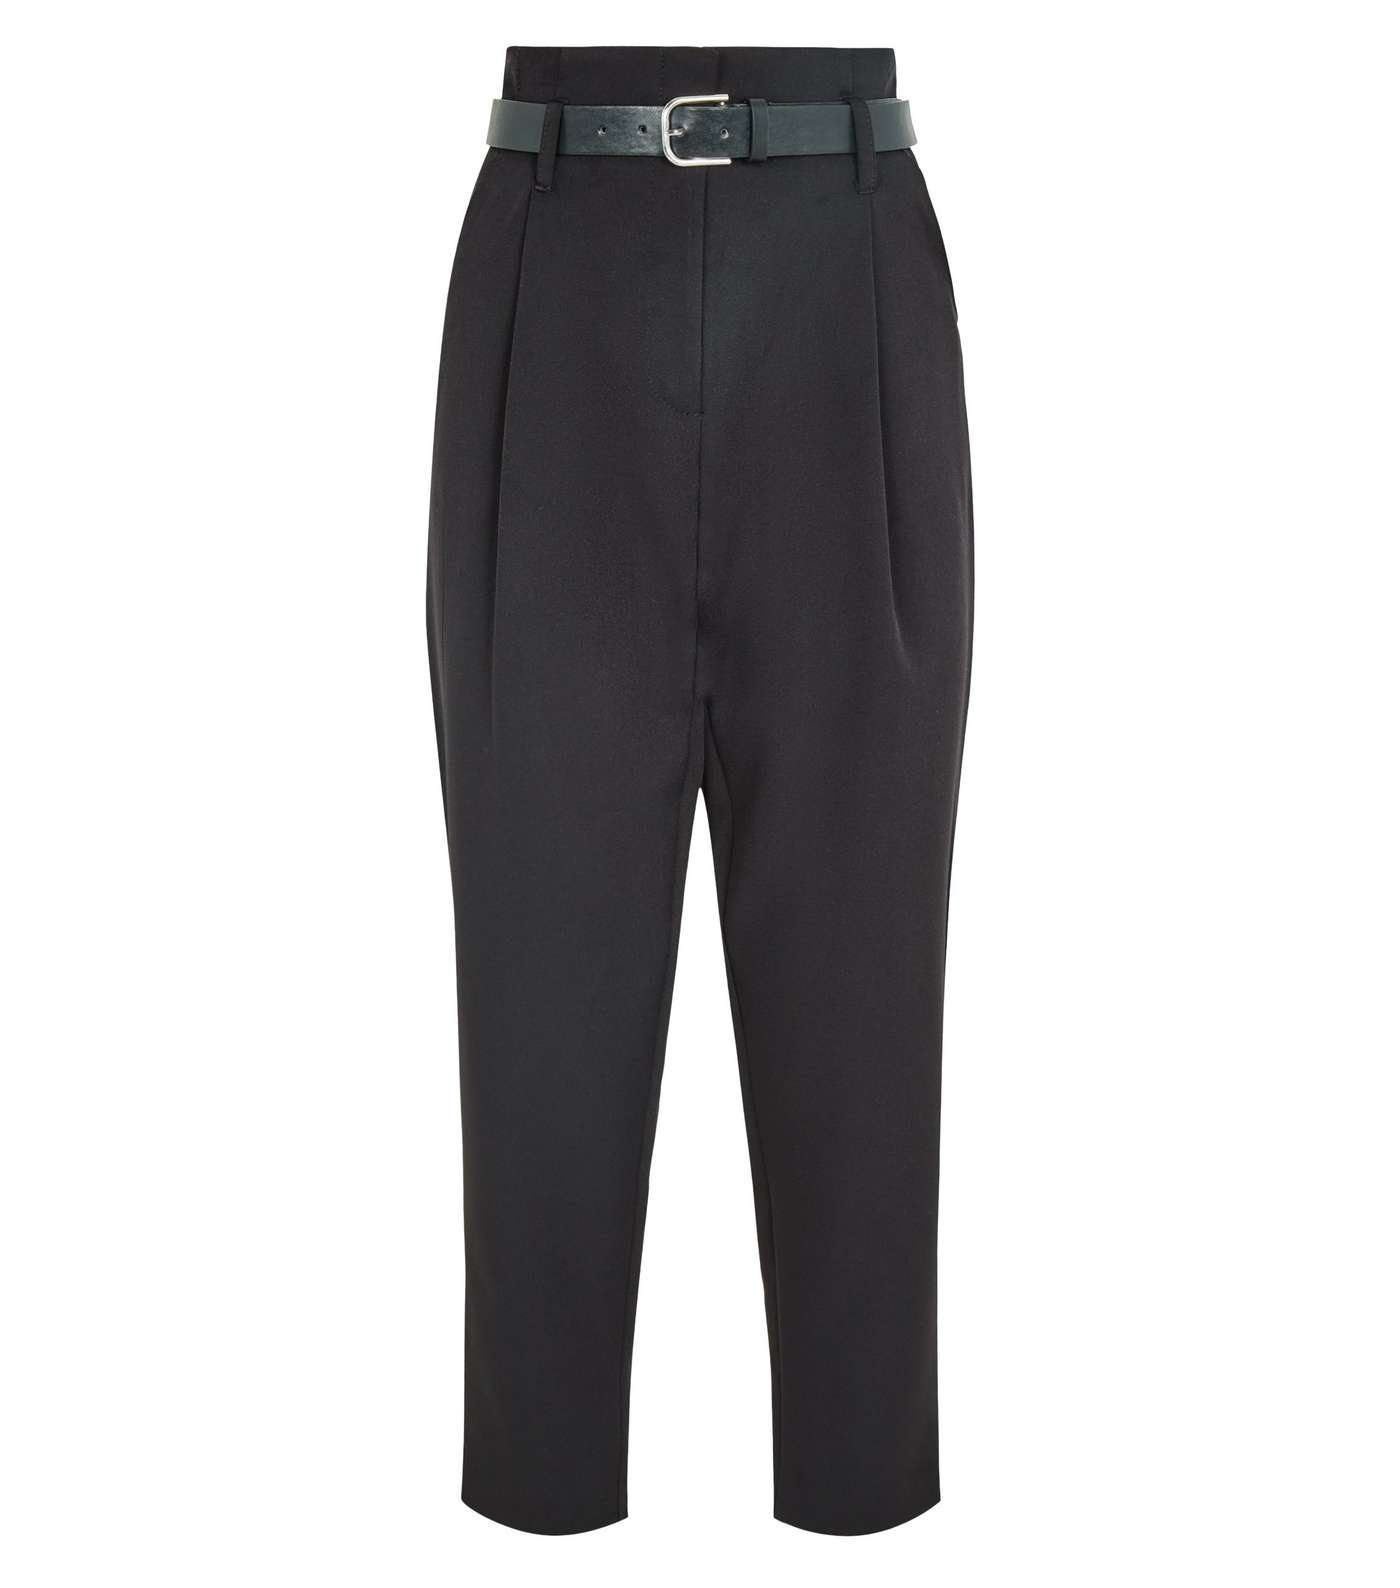 Black Belted High Waist Trousers Image 4